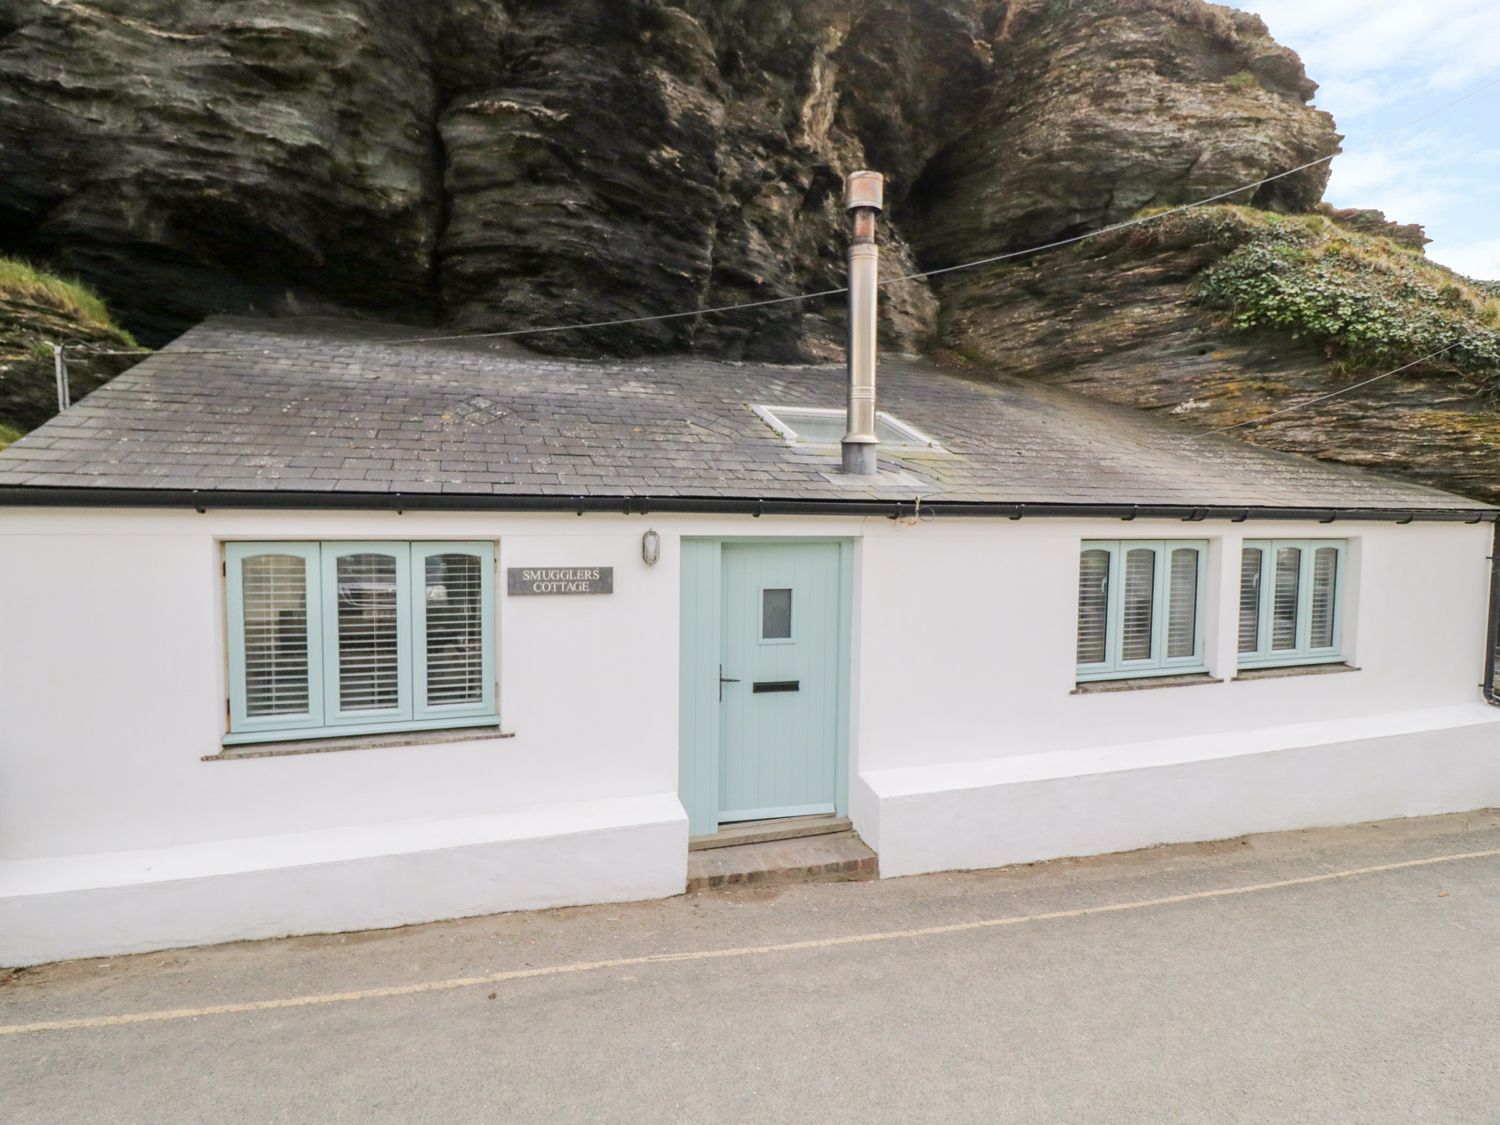 Smugglers Cottage - Cornwall - 987696 - photo 1